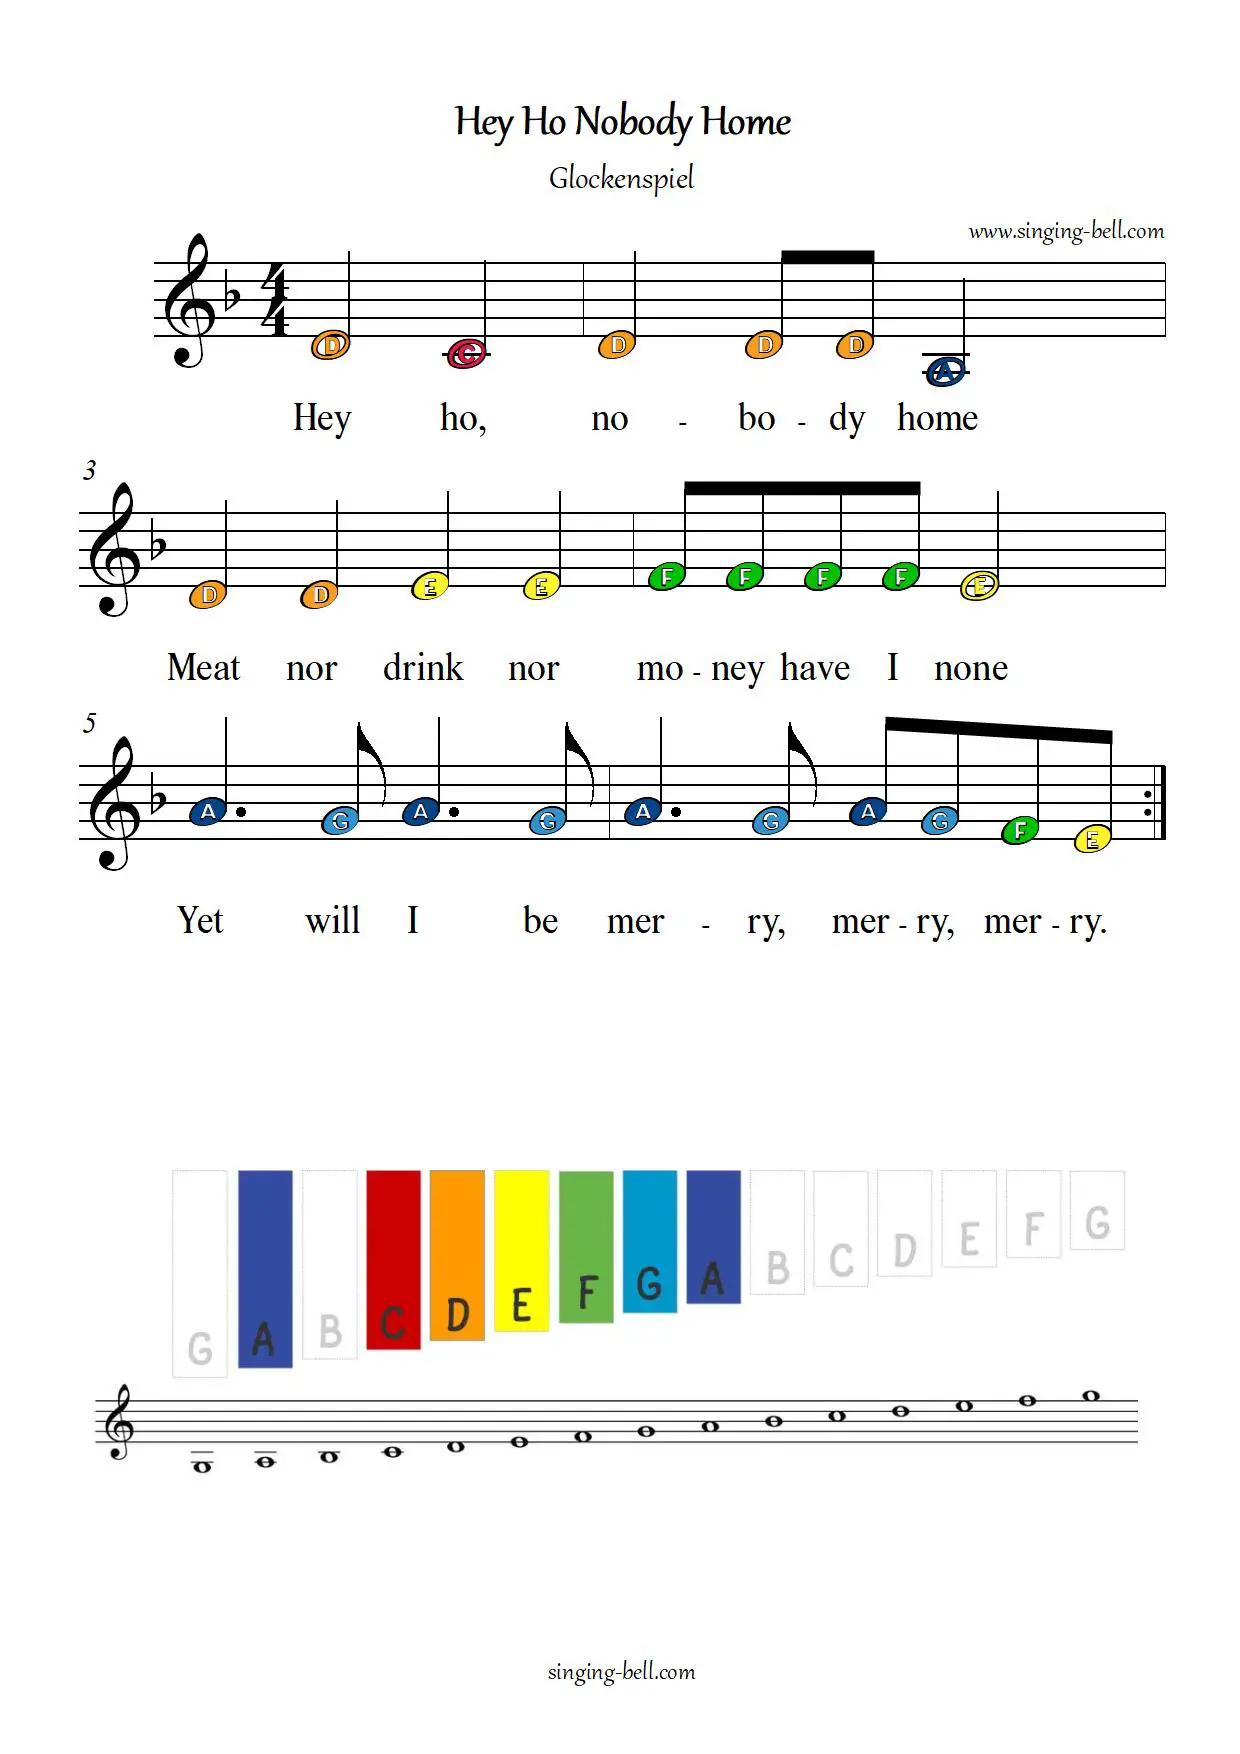 Hey Ho Nobody Home free xylophone glockenspiel sheet music color notes chart pdf